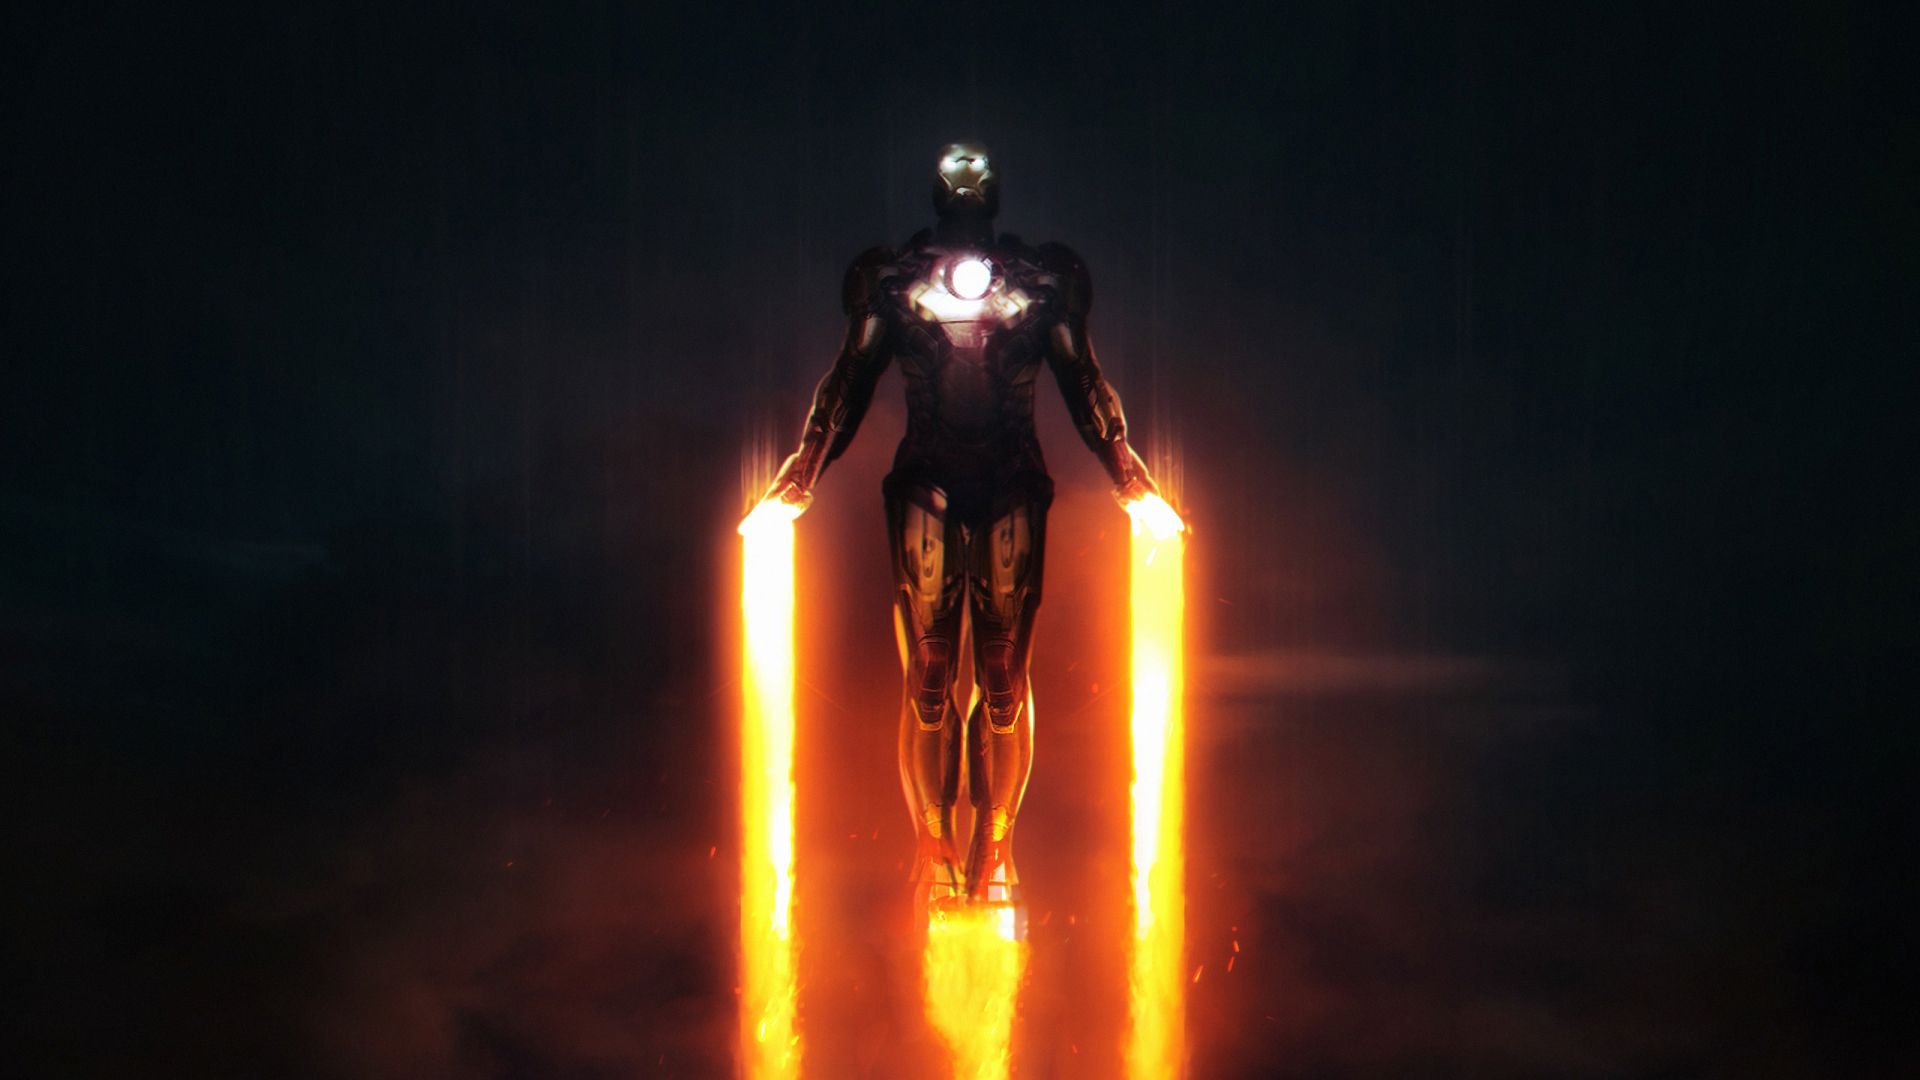 Download 1920x1080 wallpaper iron man, the only one flight, superhero, full hd, hdtv, fhd, 1080p, 1920x1080 HD image, background, 22622